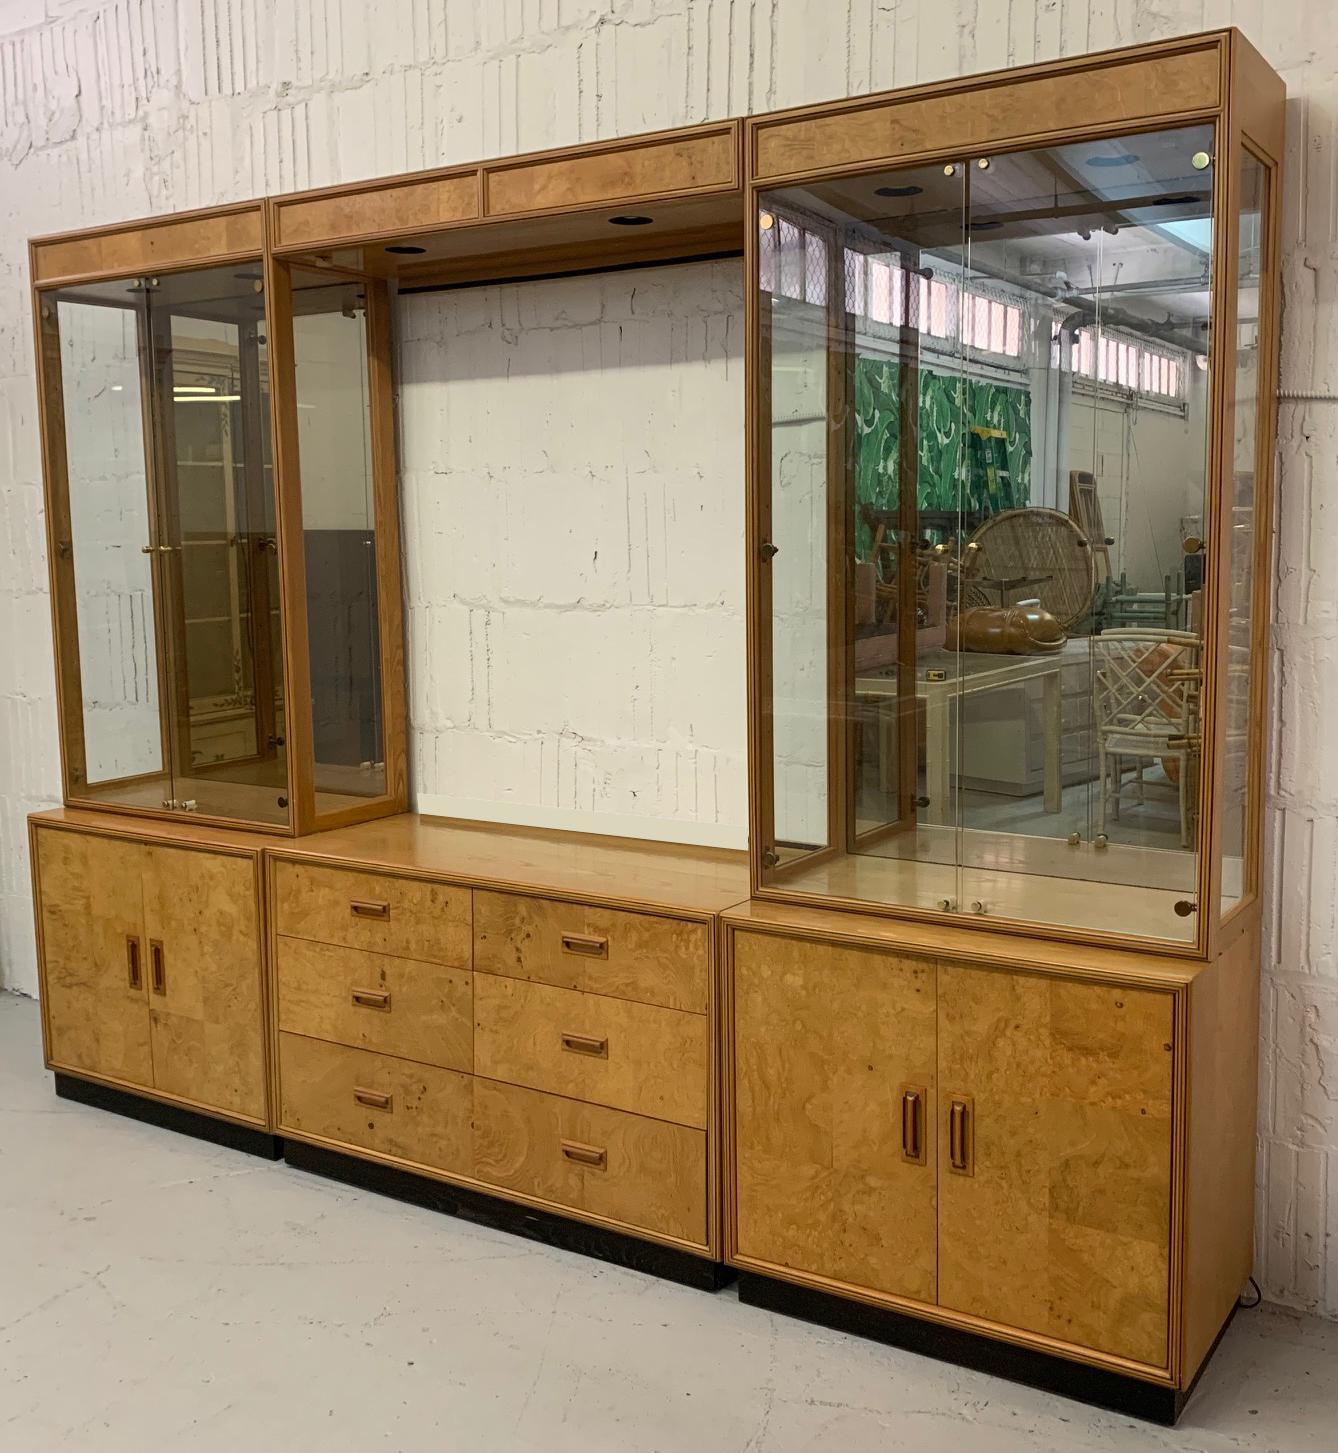 Large Milo Baughman style Mid-Century Modern 6-piece wall unit features patch work burl wood construction, mirrored display cases with glass shelves, and hand inlaid door pulls. From the Henredon 